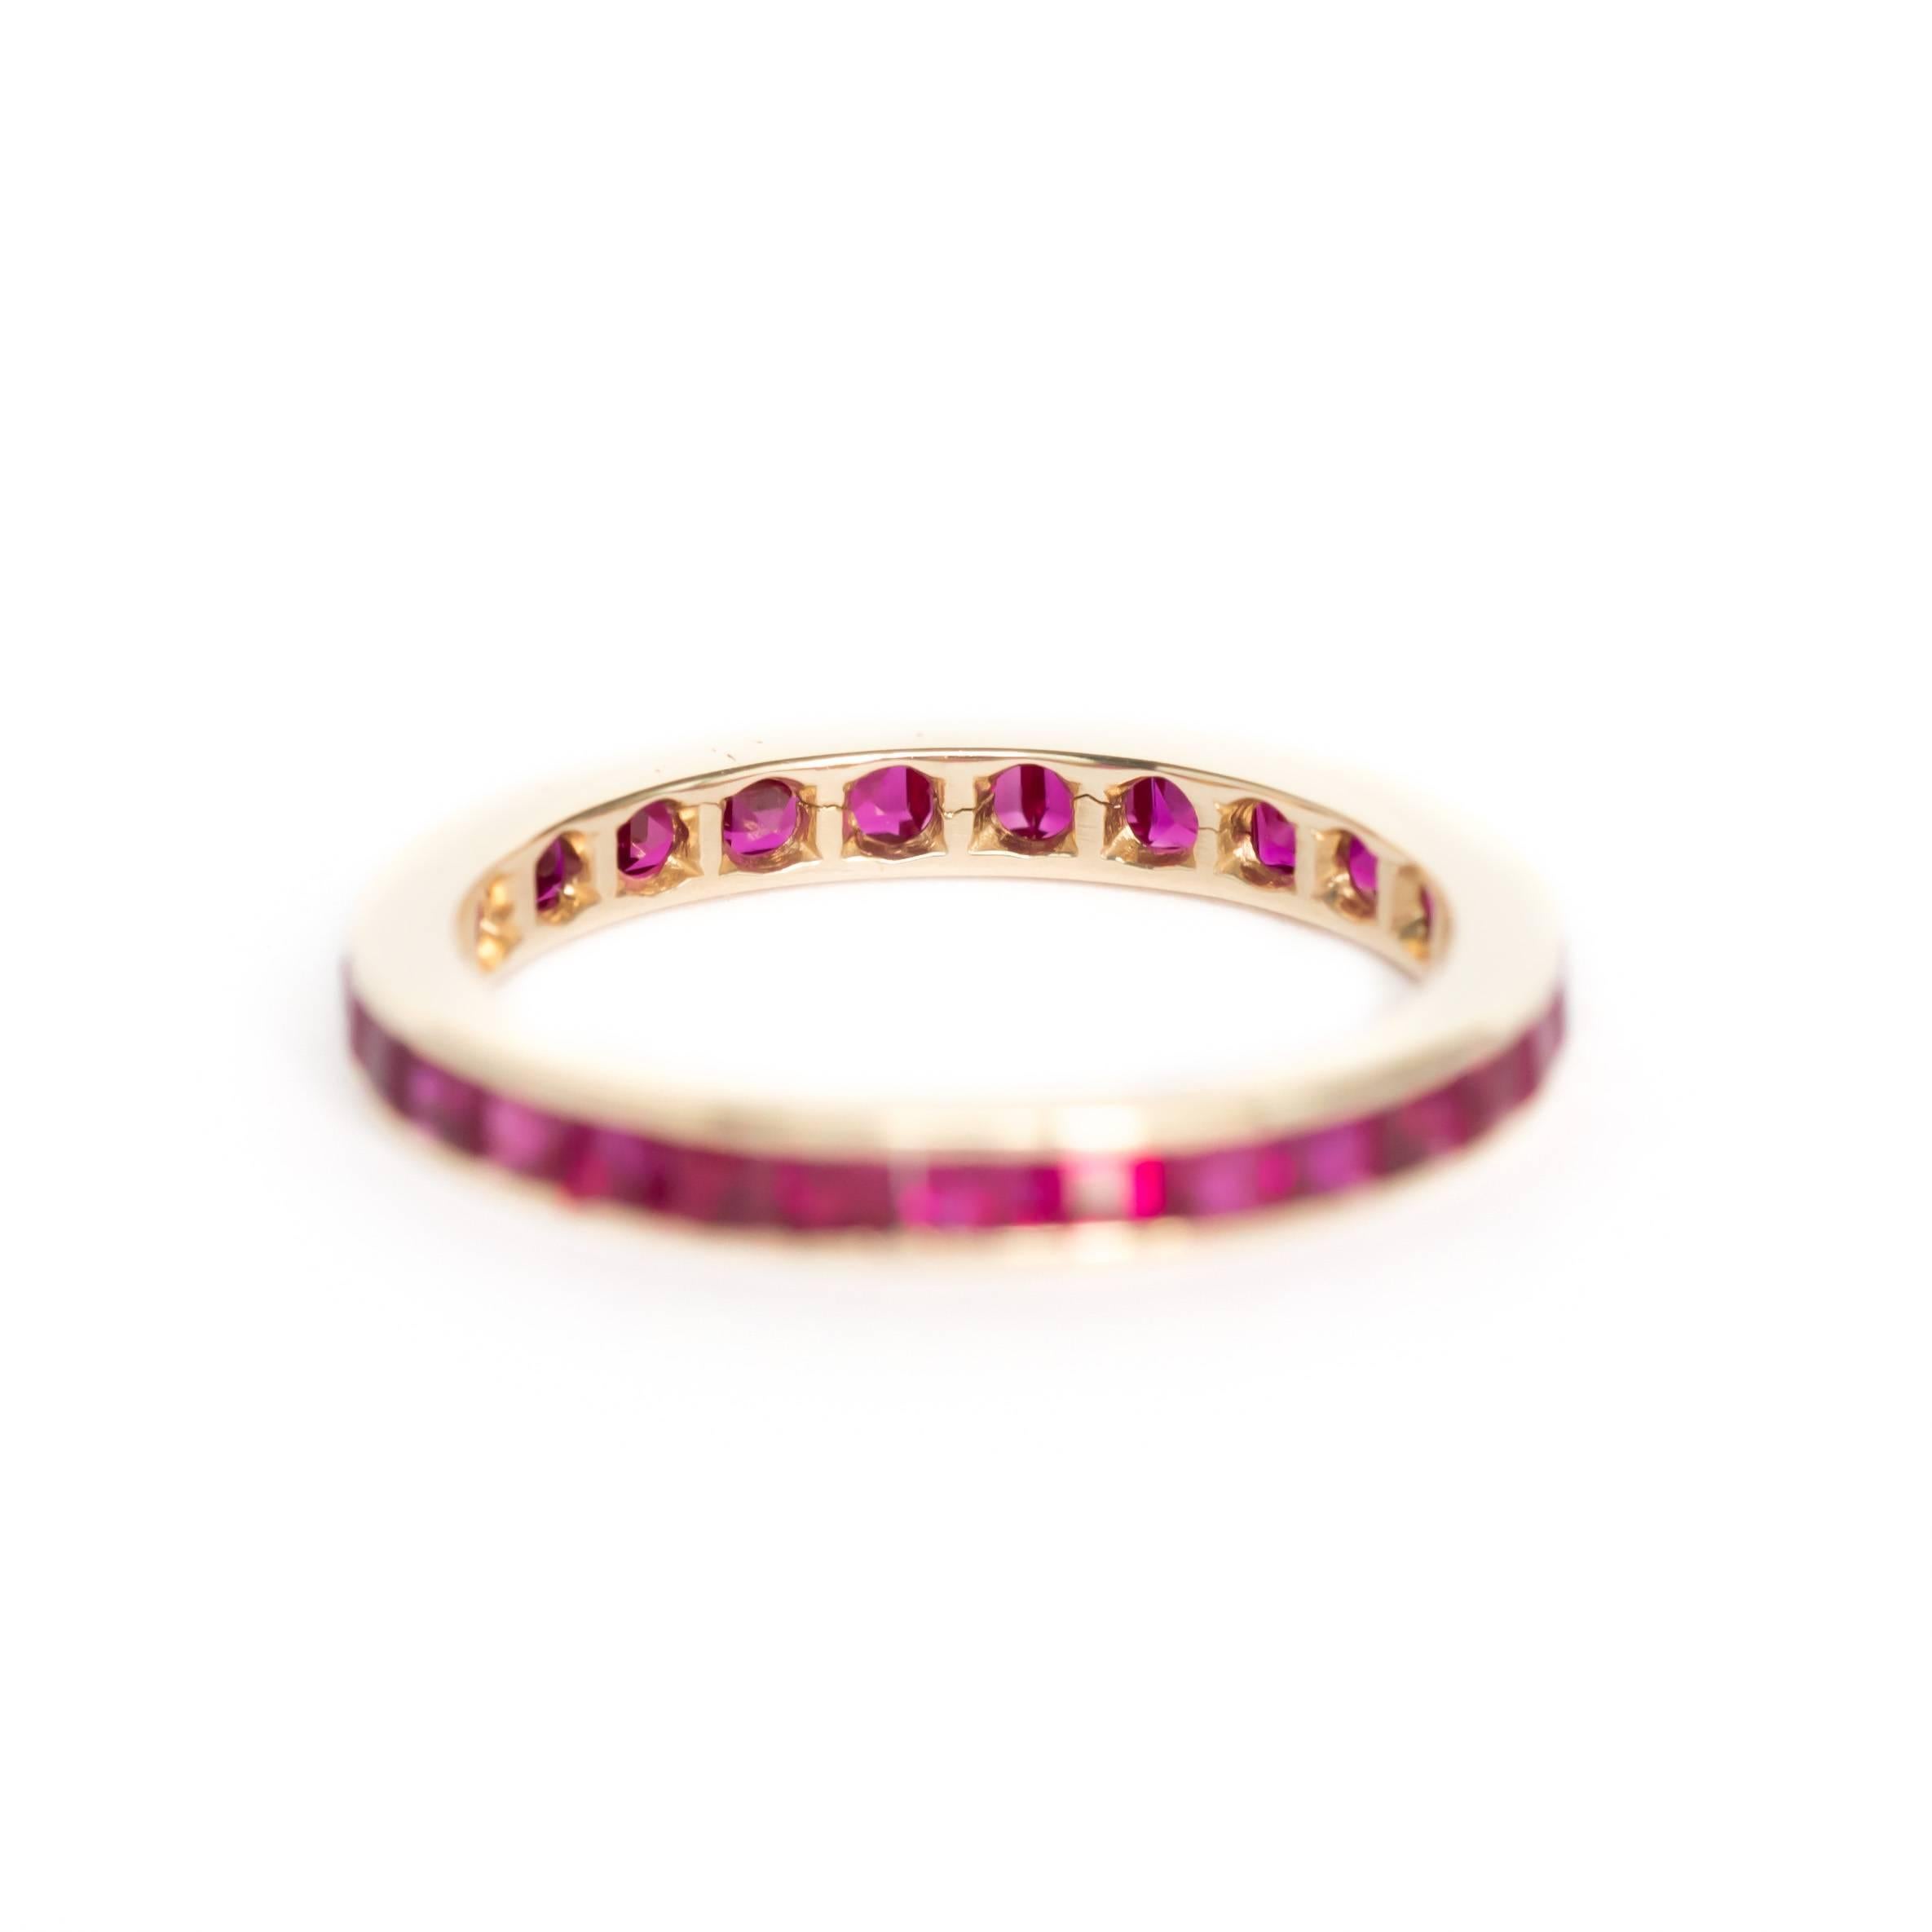 Item Details: 
Ring Size: Approximately 6.40
Metal Type: 14 Karat Yellow Gold
Weight: 1.7 grams

Color Stone Details: 
Type: Synthetic Ruby
Shape: Princess Cut
Carat Weight: 1.50 carat, total weight.
Color: Deep Red

Finger to Top of Stone